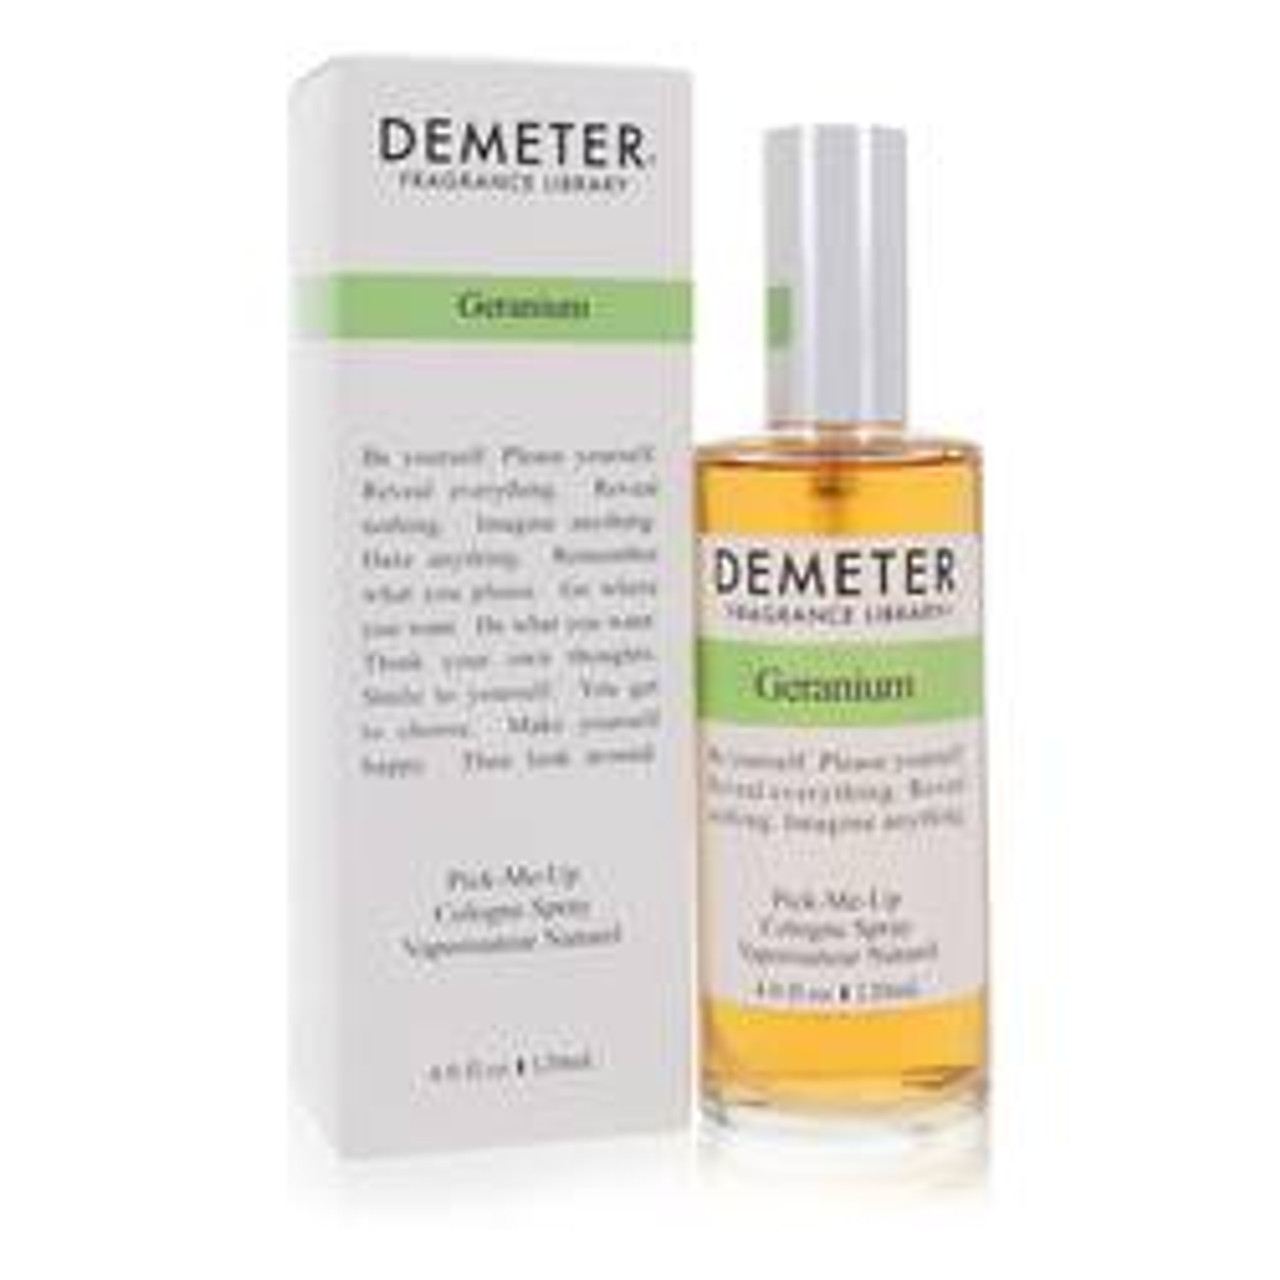 Demeter Geranium Perfume By Demeter Cologne Spray 4 oz for Women - [From 79.50 - Choose pk Qty ] - *Ships from Miami